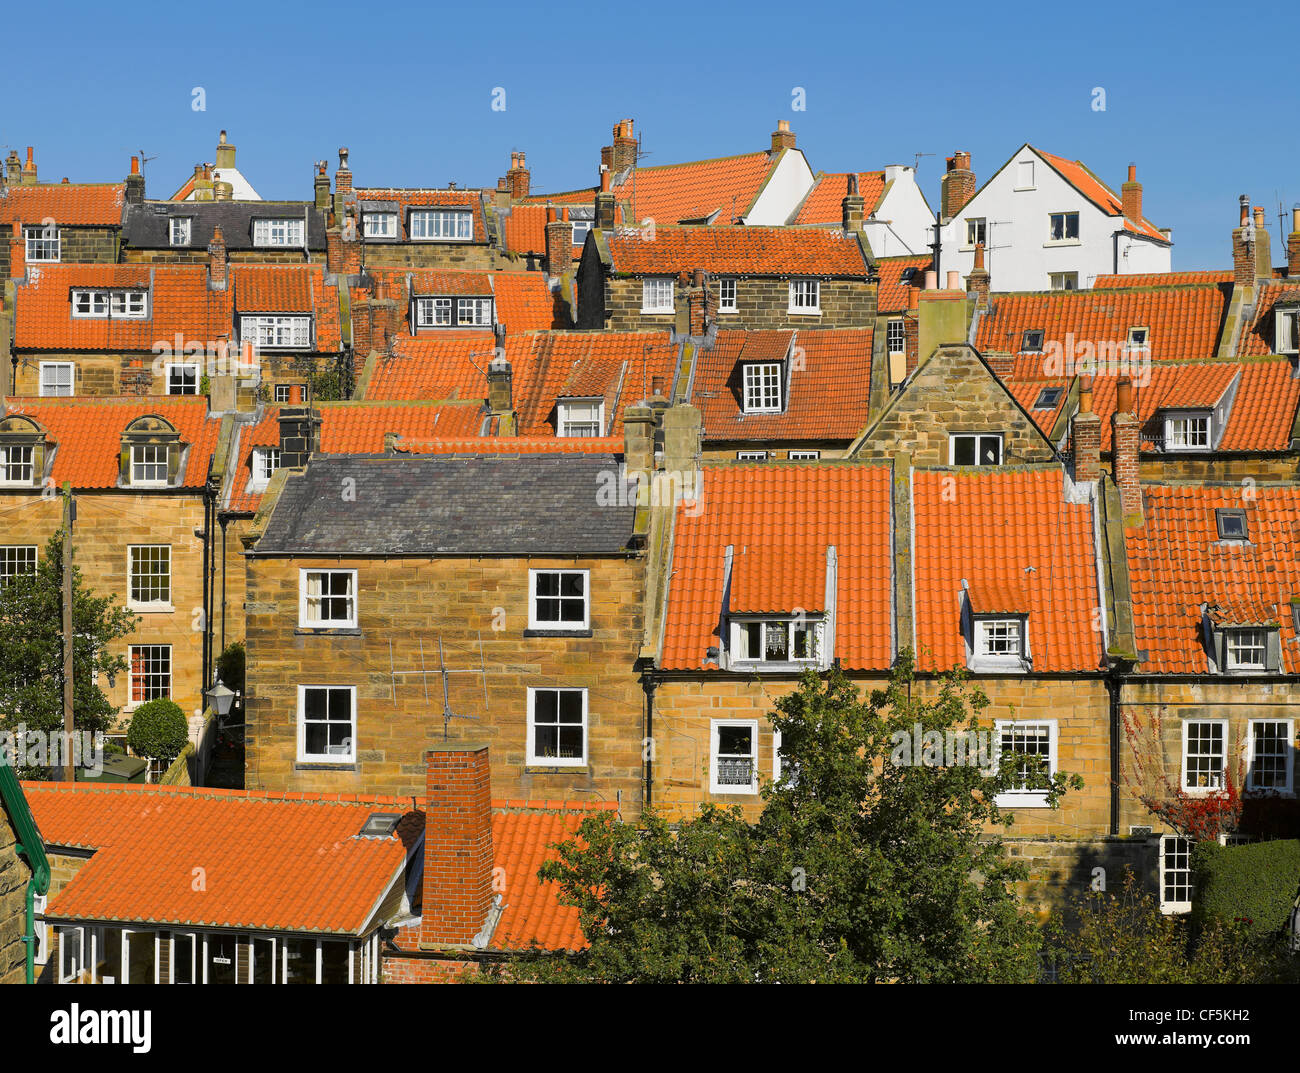 Roof tops of houses in Robin Hoods Bay, the busiest smuggling community on the Yorkshire coast during the 18th century. Stock Photo